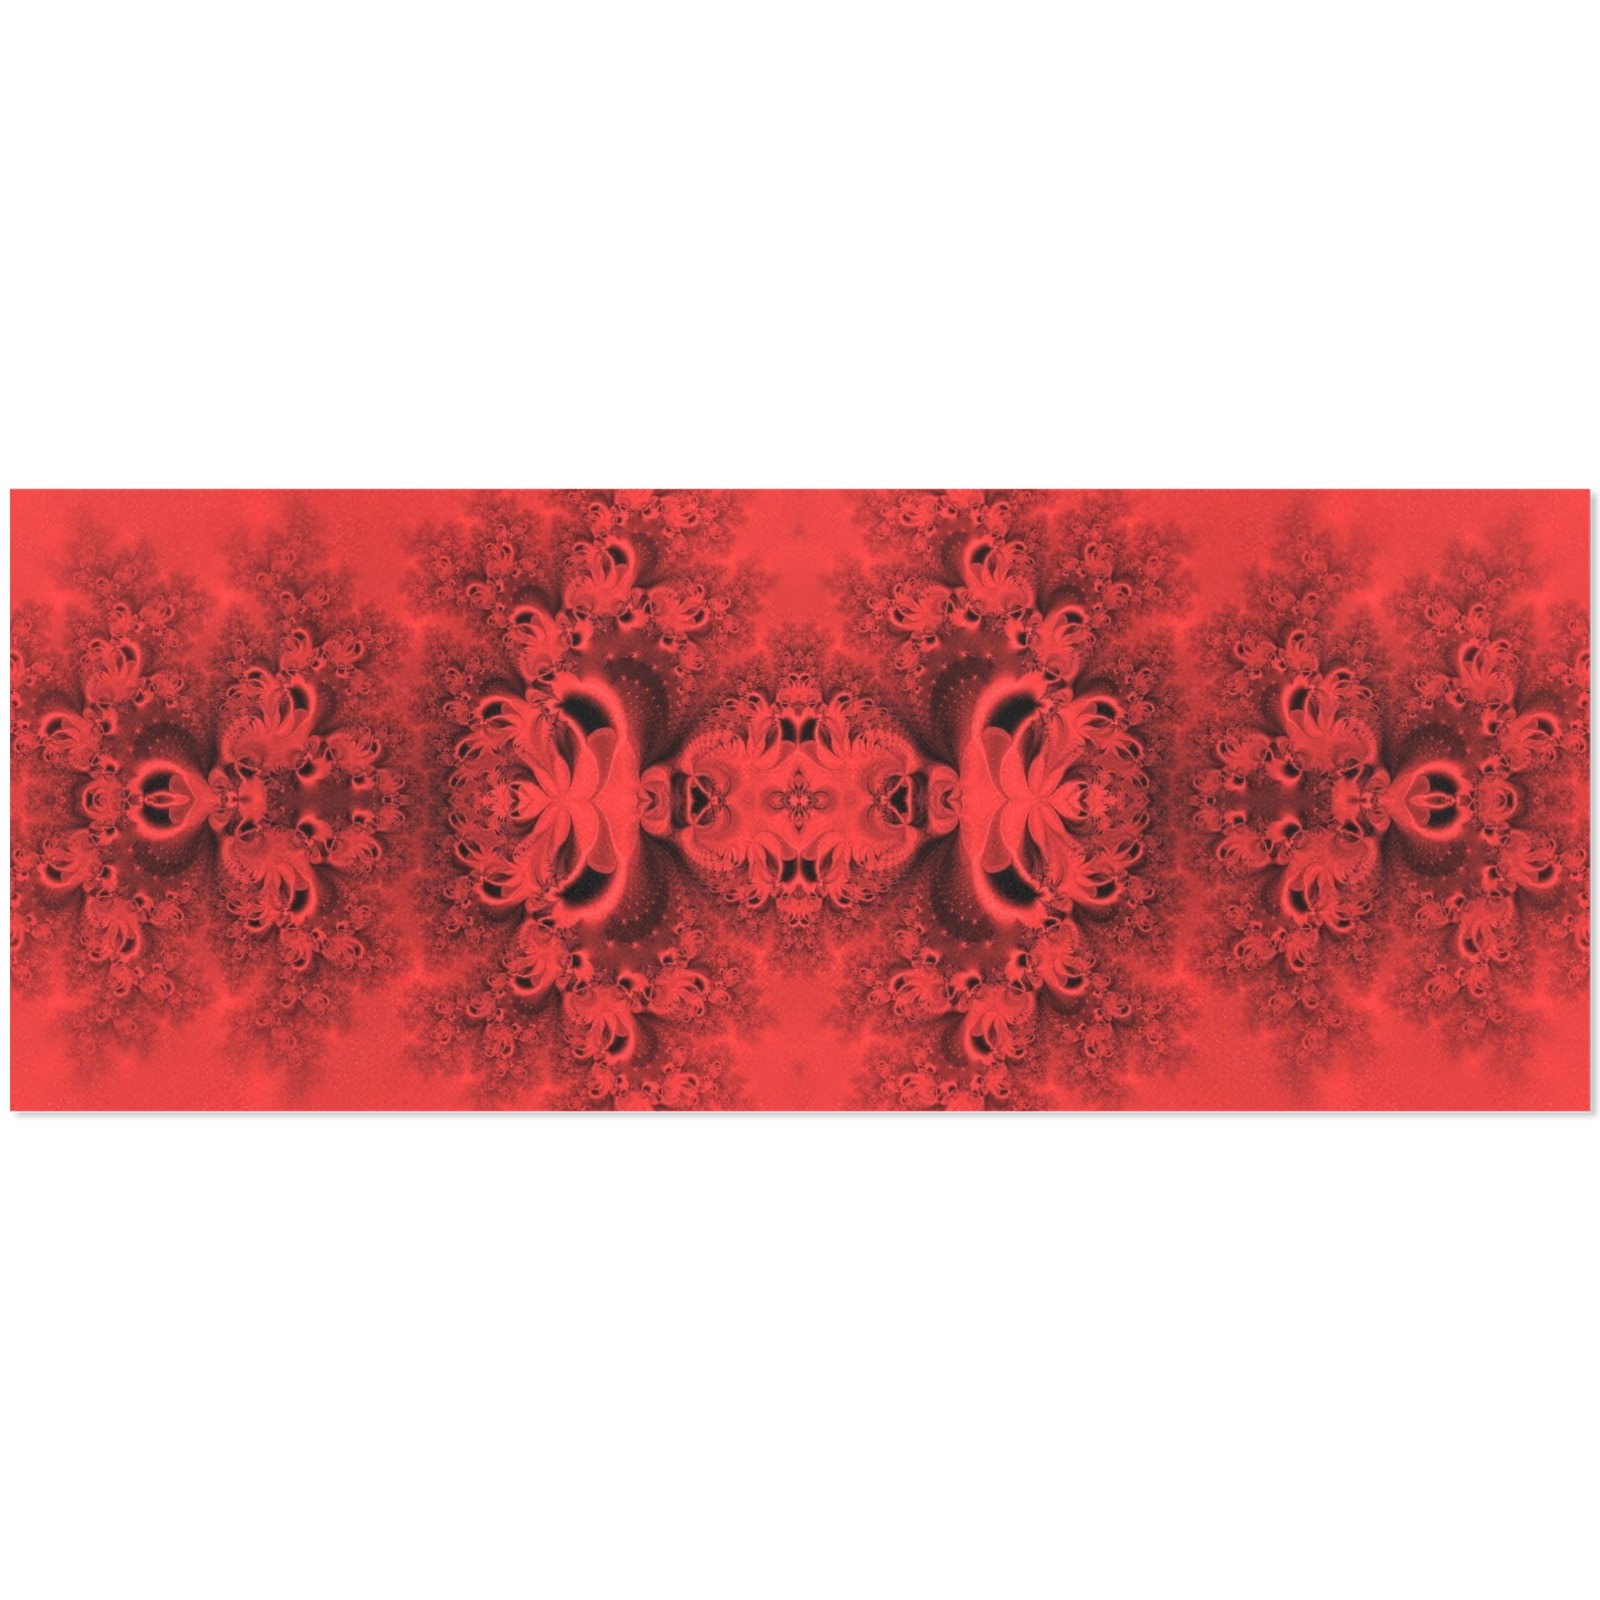 Autumn Reds in the Garden Frost Fractal Gift Wrapping Paper 58"x 23" (2 Rolls)